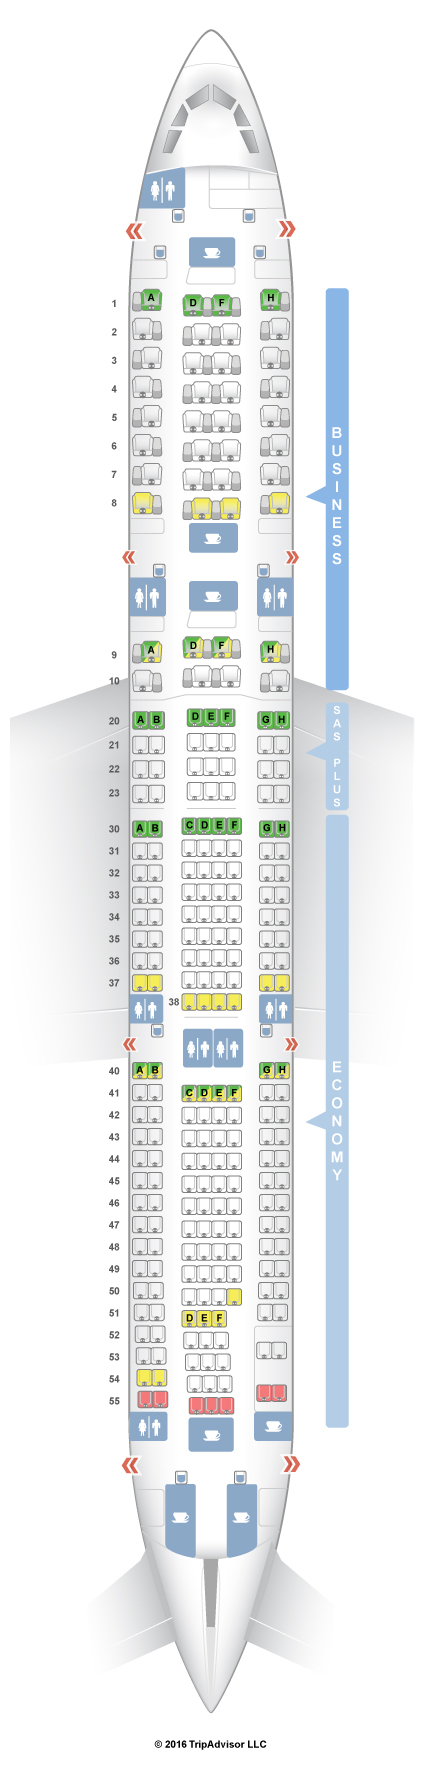 A343 Jet Seating Chart